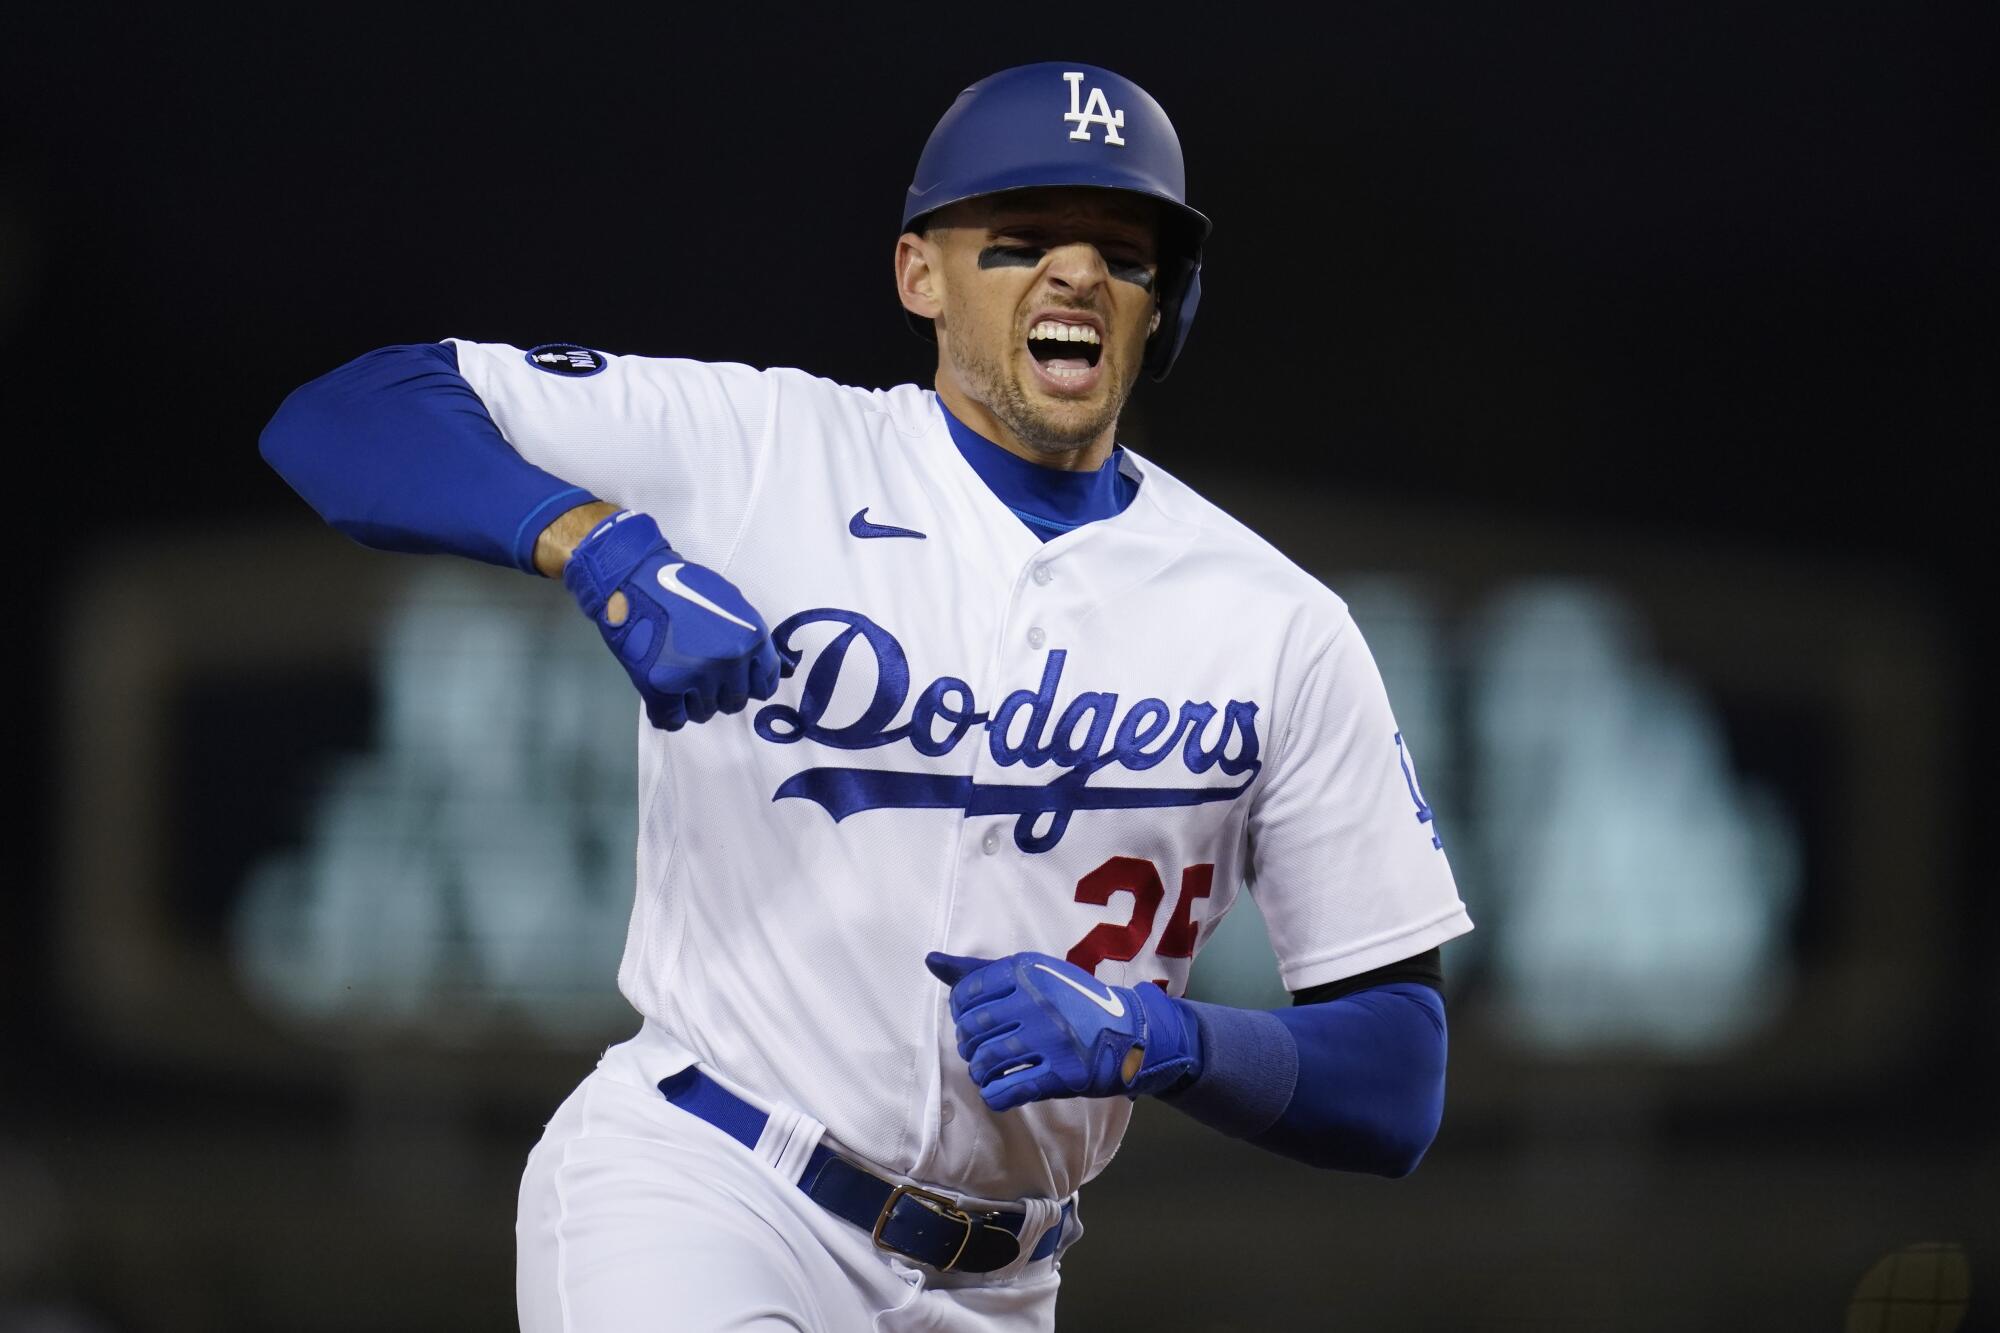 Trayce Thompson had a home run and four RBIs as the Dodgers beat the Brewers on Tuesday. (AP Photo/Ashley Landis)